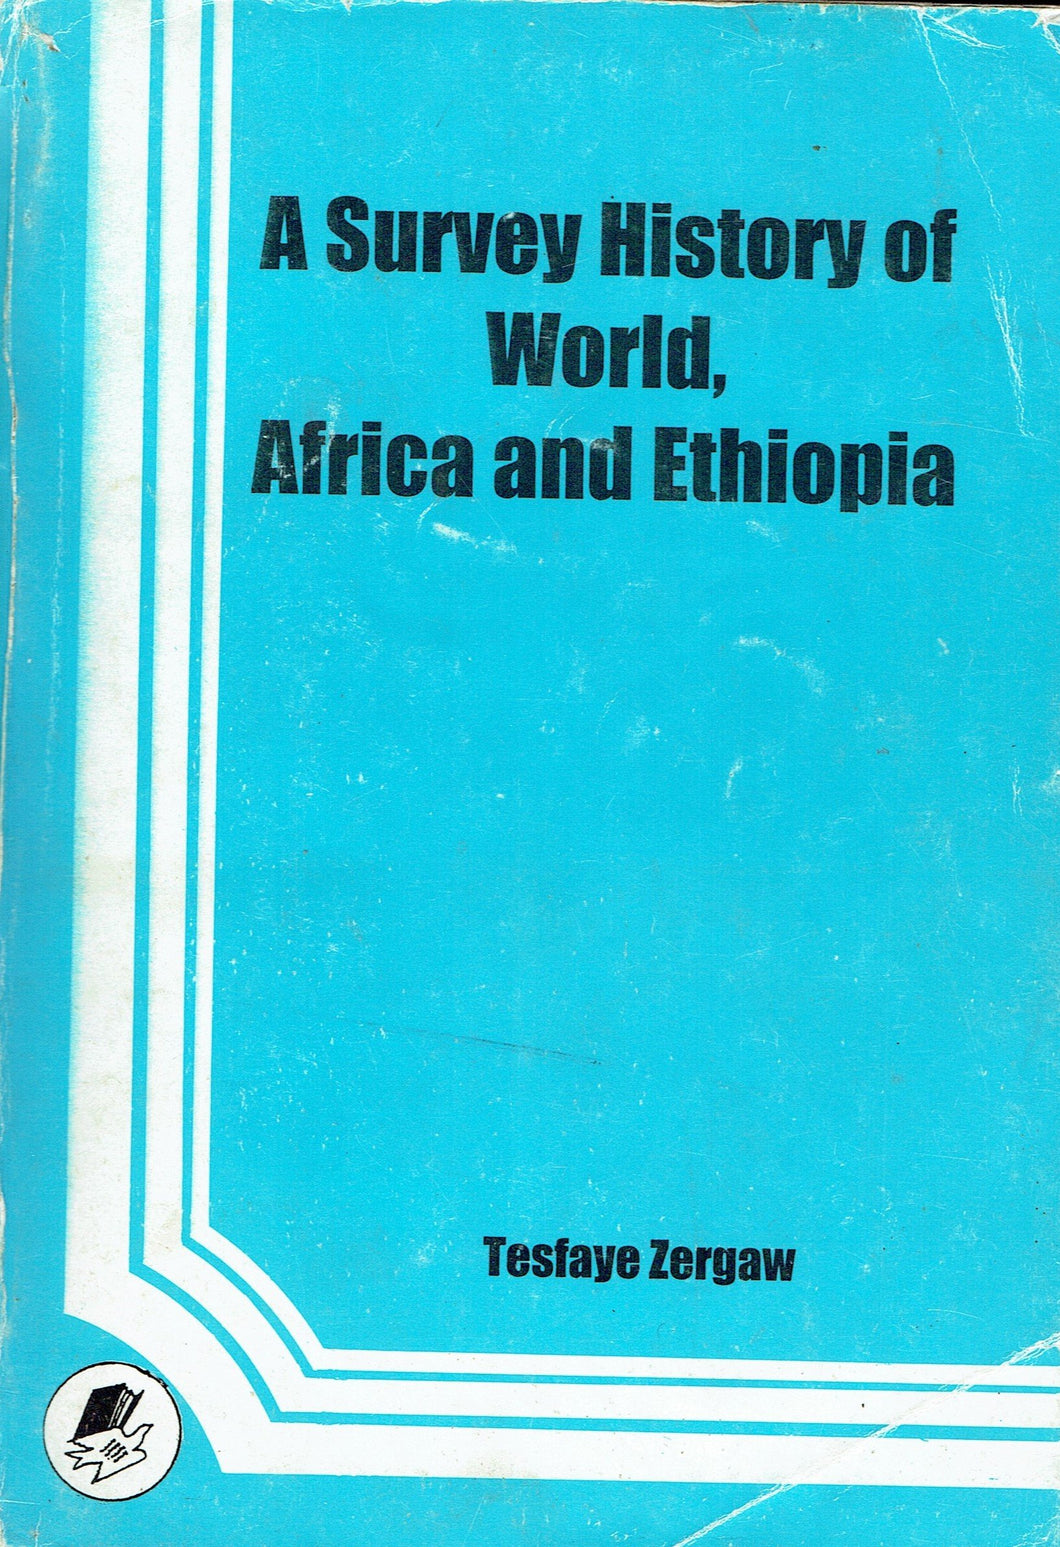 A Survey History of World, Africa and Ethiopia